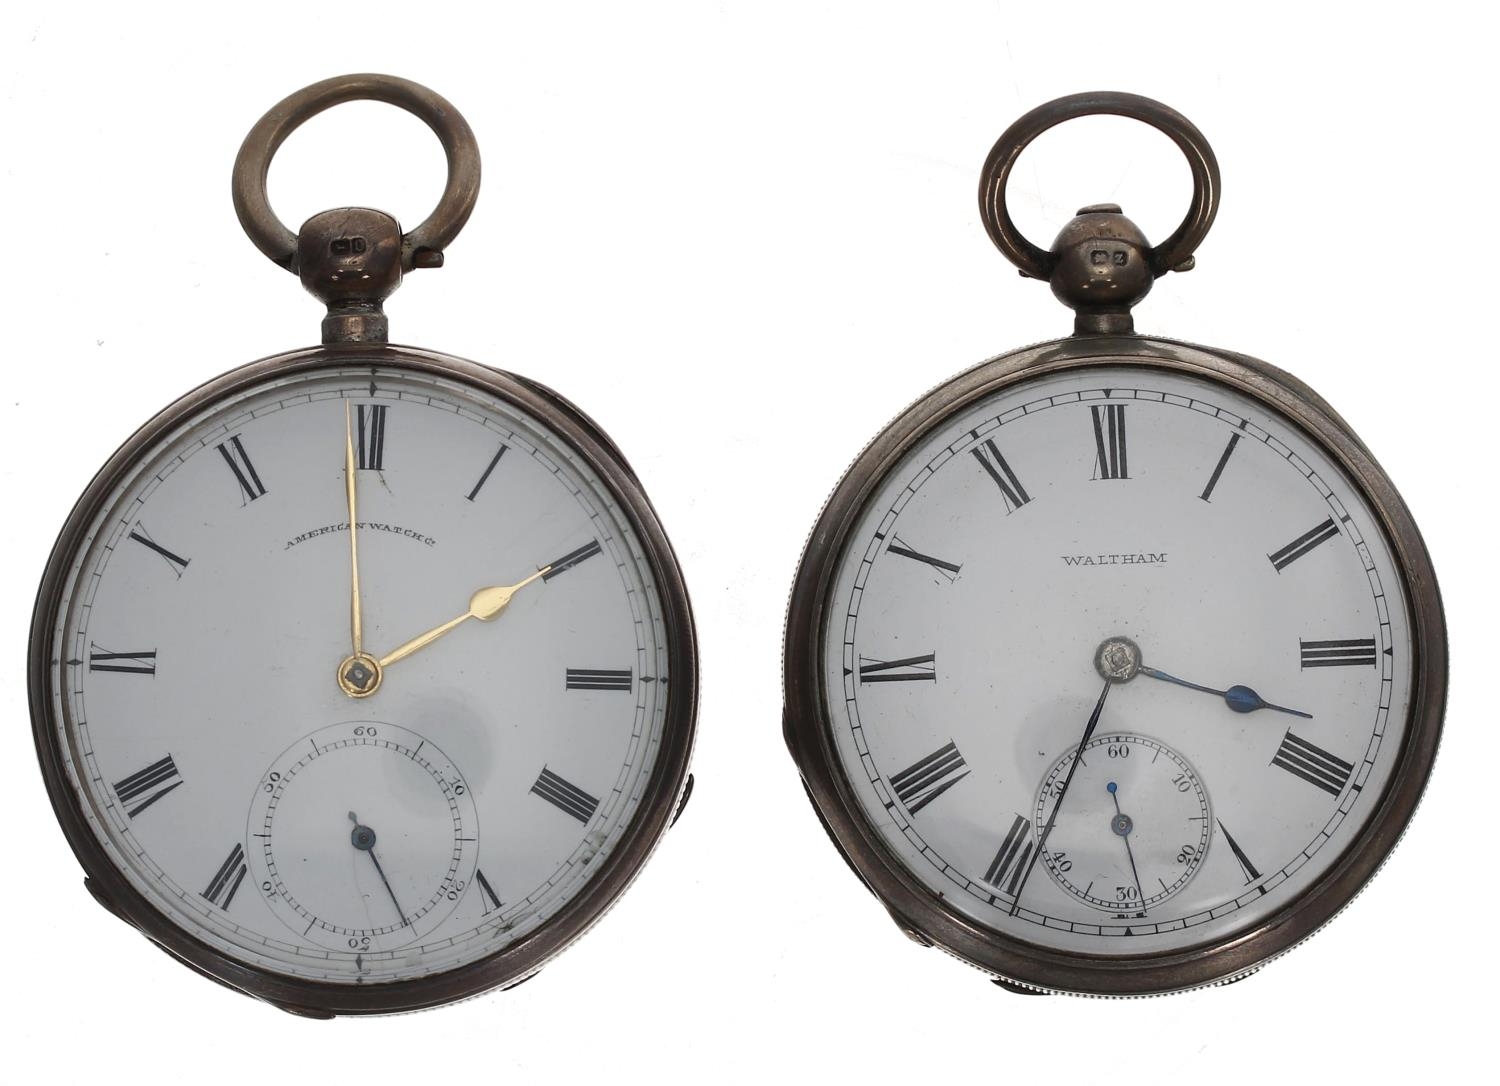 Home Watch Co. Waltham silver lever engine turned pocket watch in need of attention, 52mm;